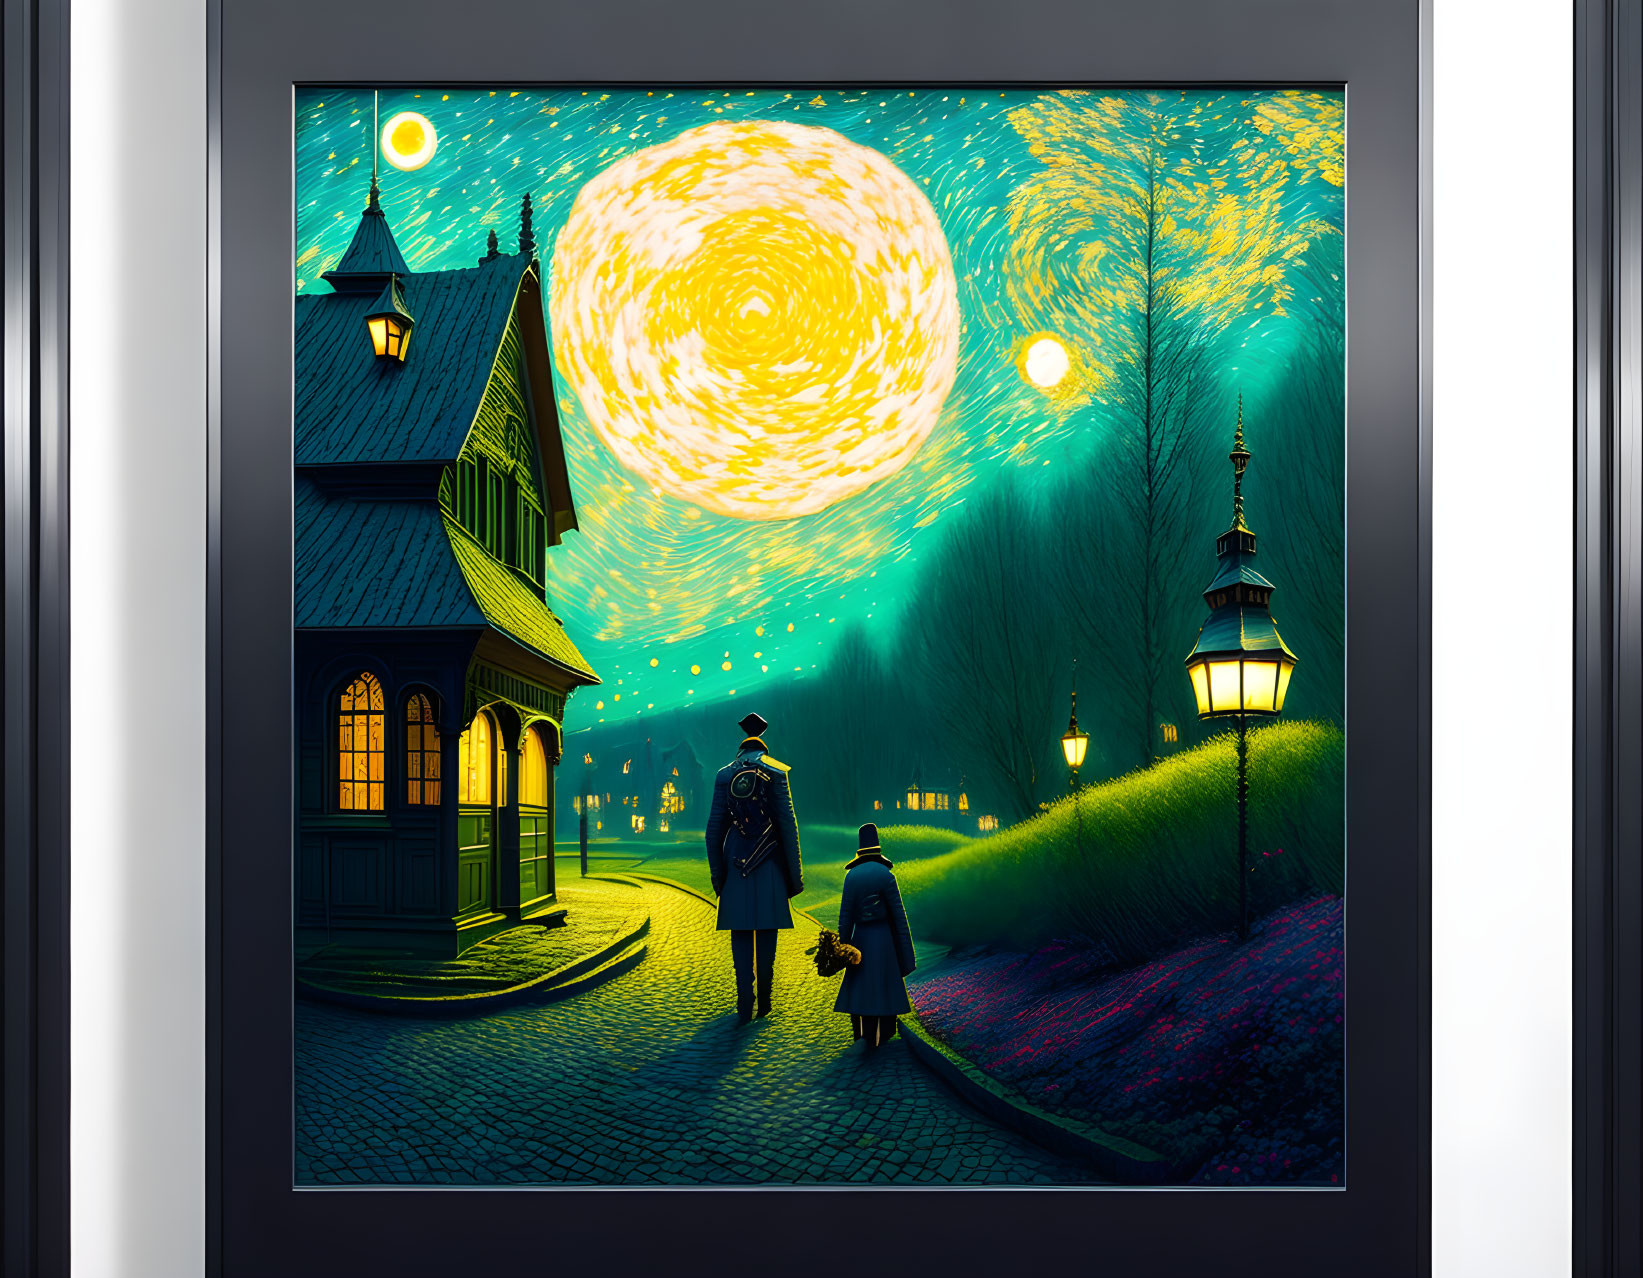 Stylized artwork of parent and child by lantern under starry sky